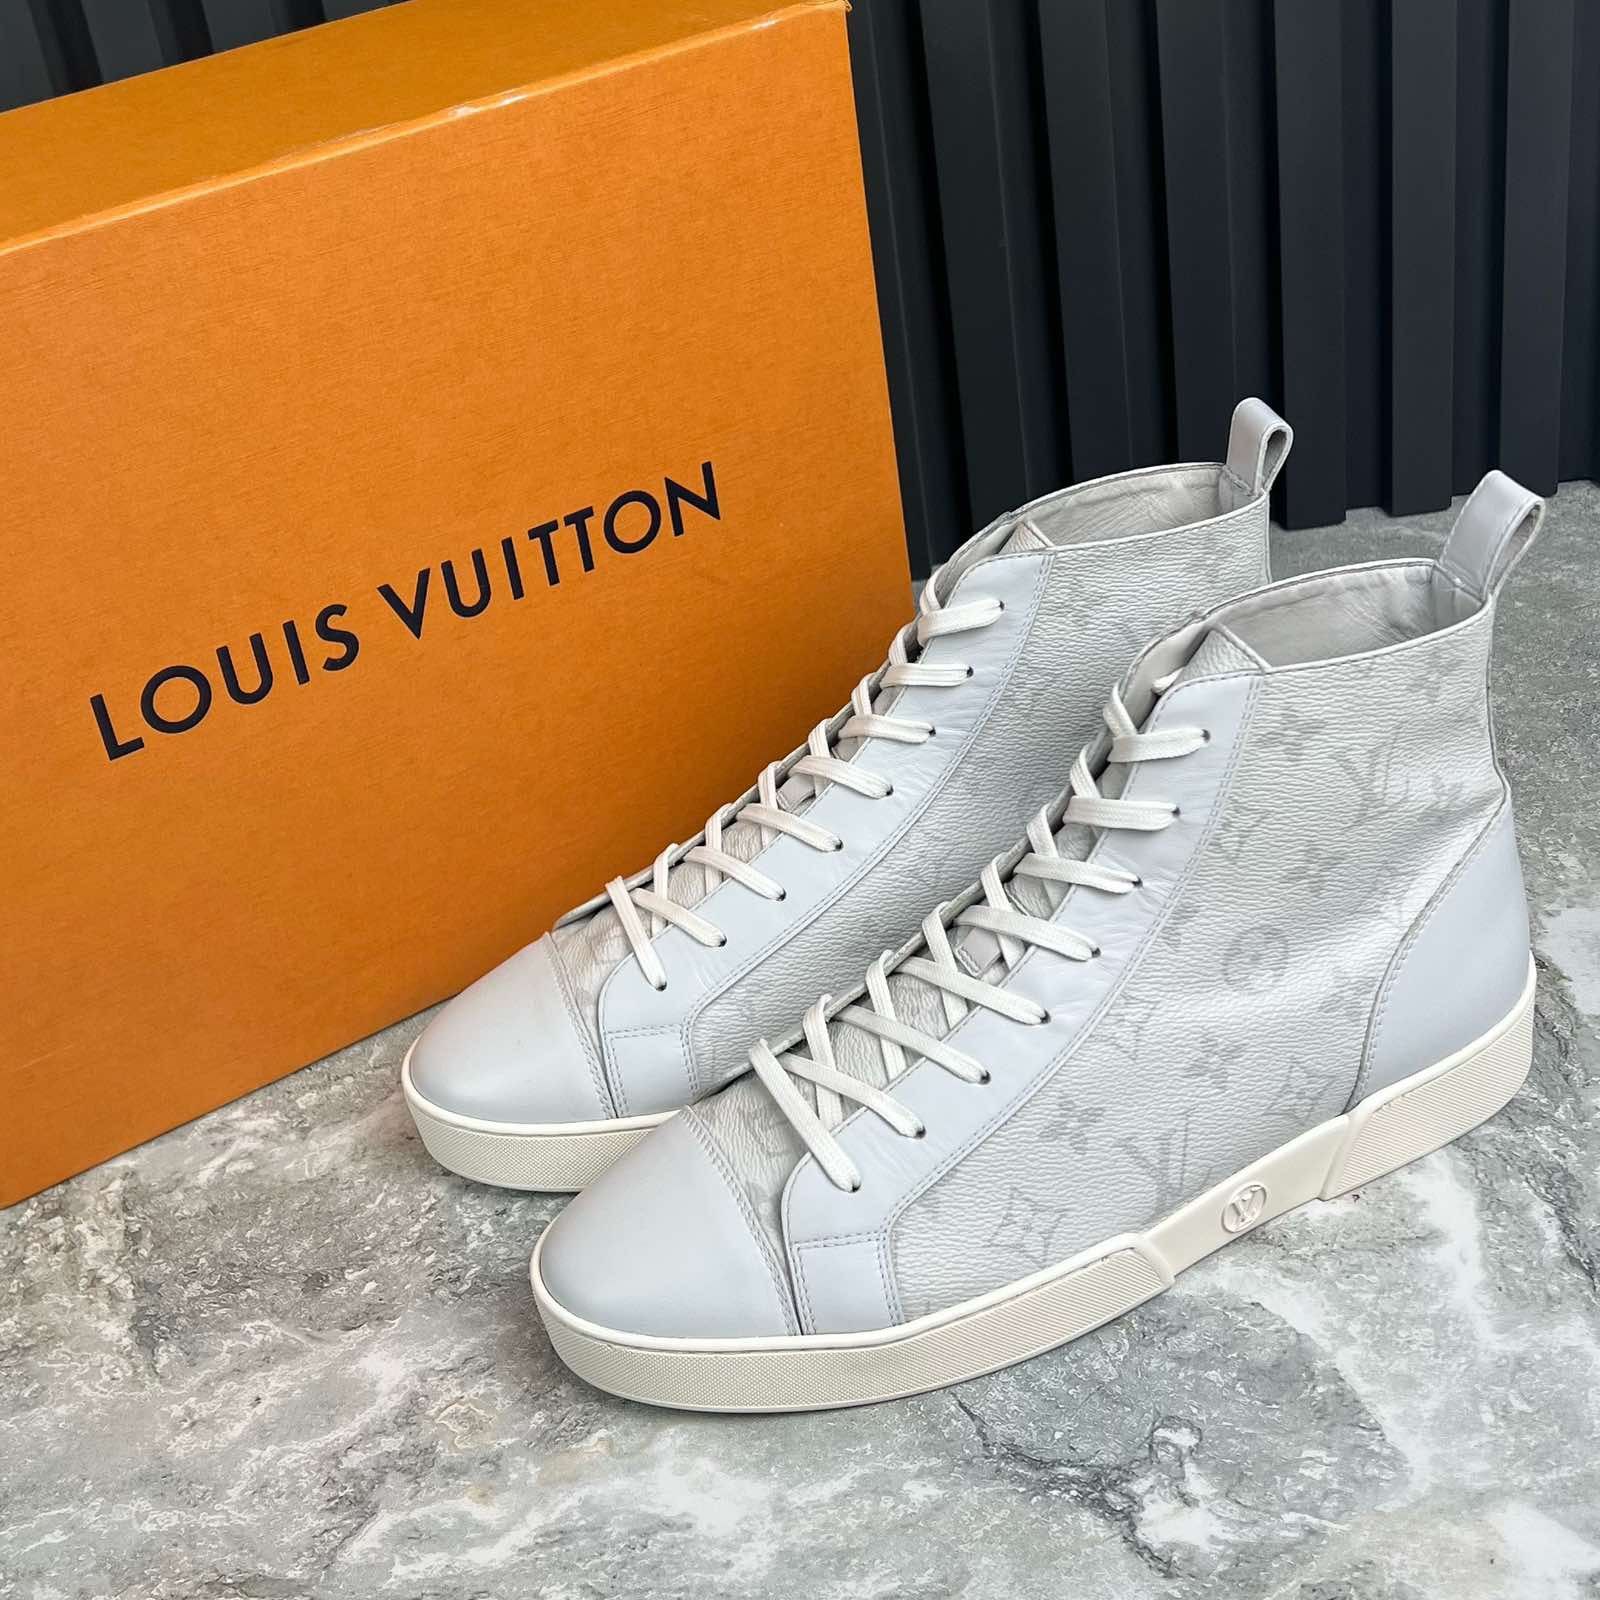 LOUIS VUITTON TRAINER Sneaker Shoes Boot High Top Fastball UK 7 US